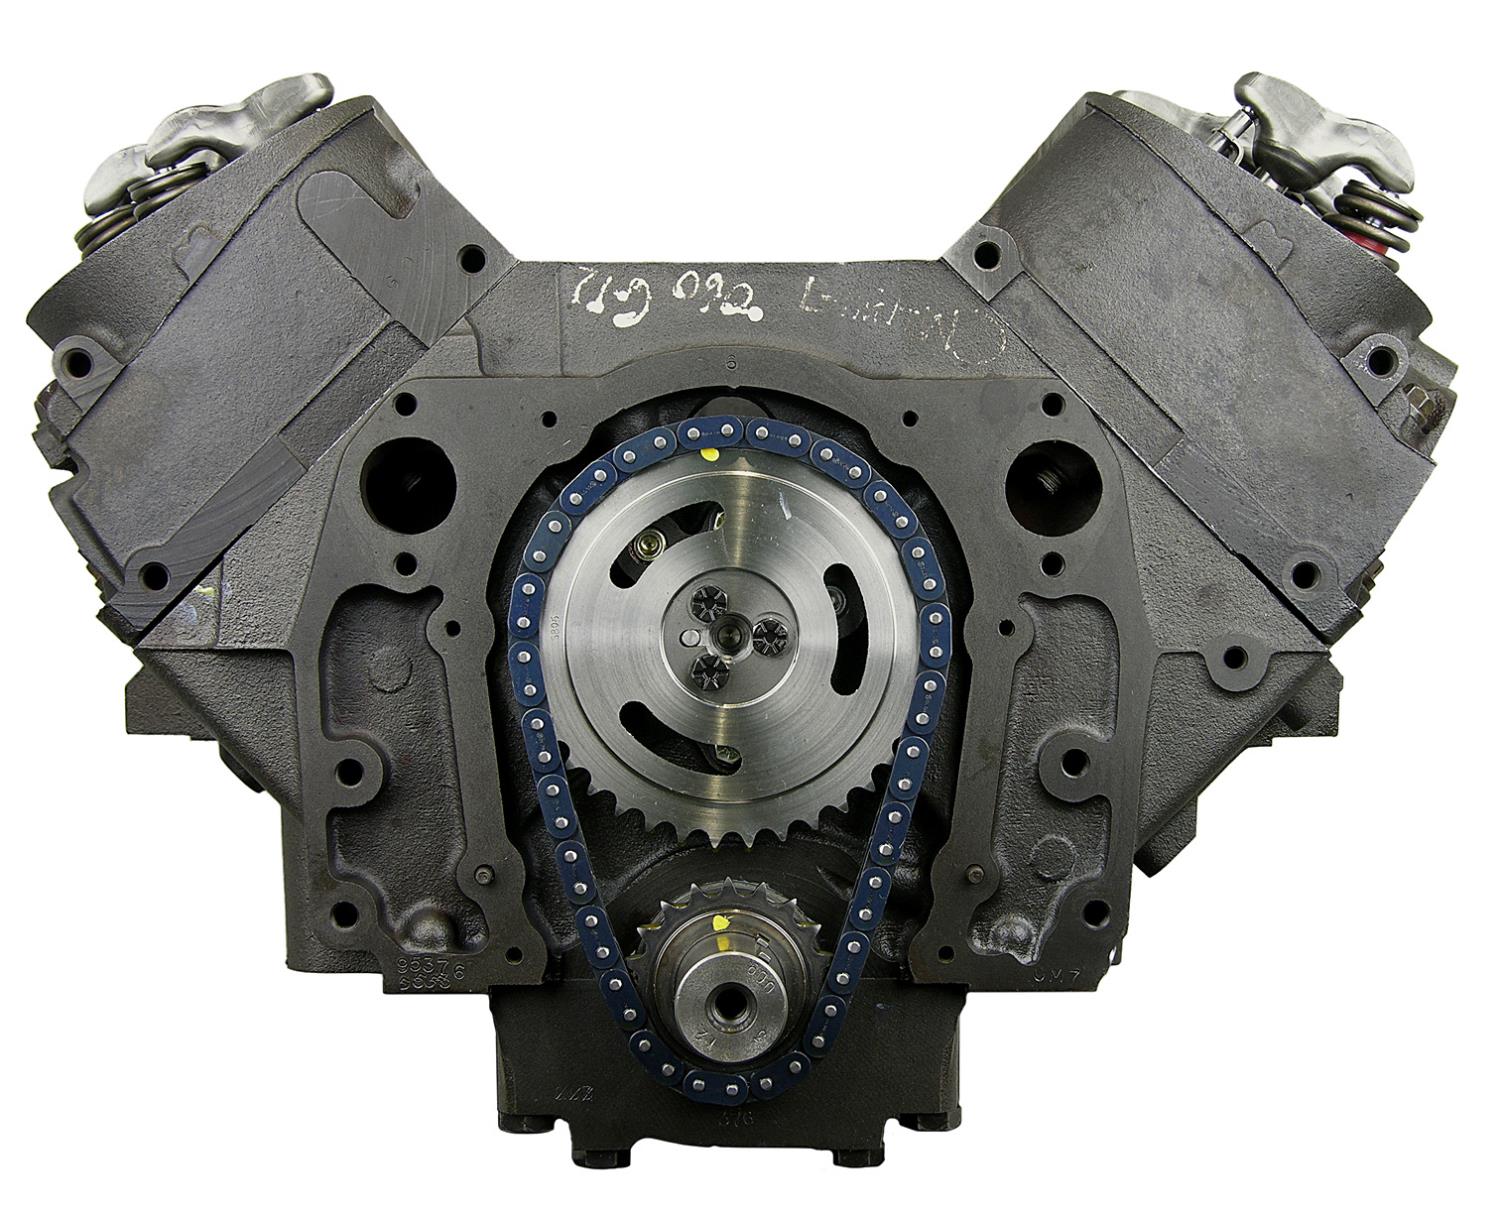 DMK1 Remanufactured Crate Engine for Marine Applications with 1996-2003 Big Block Chevy 454ci/7.4L